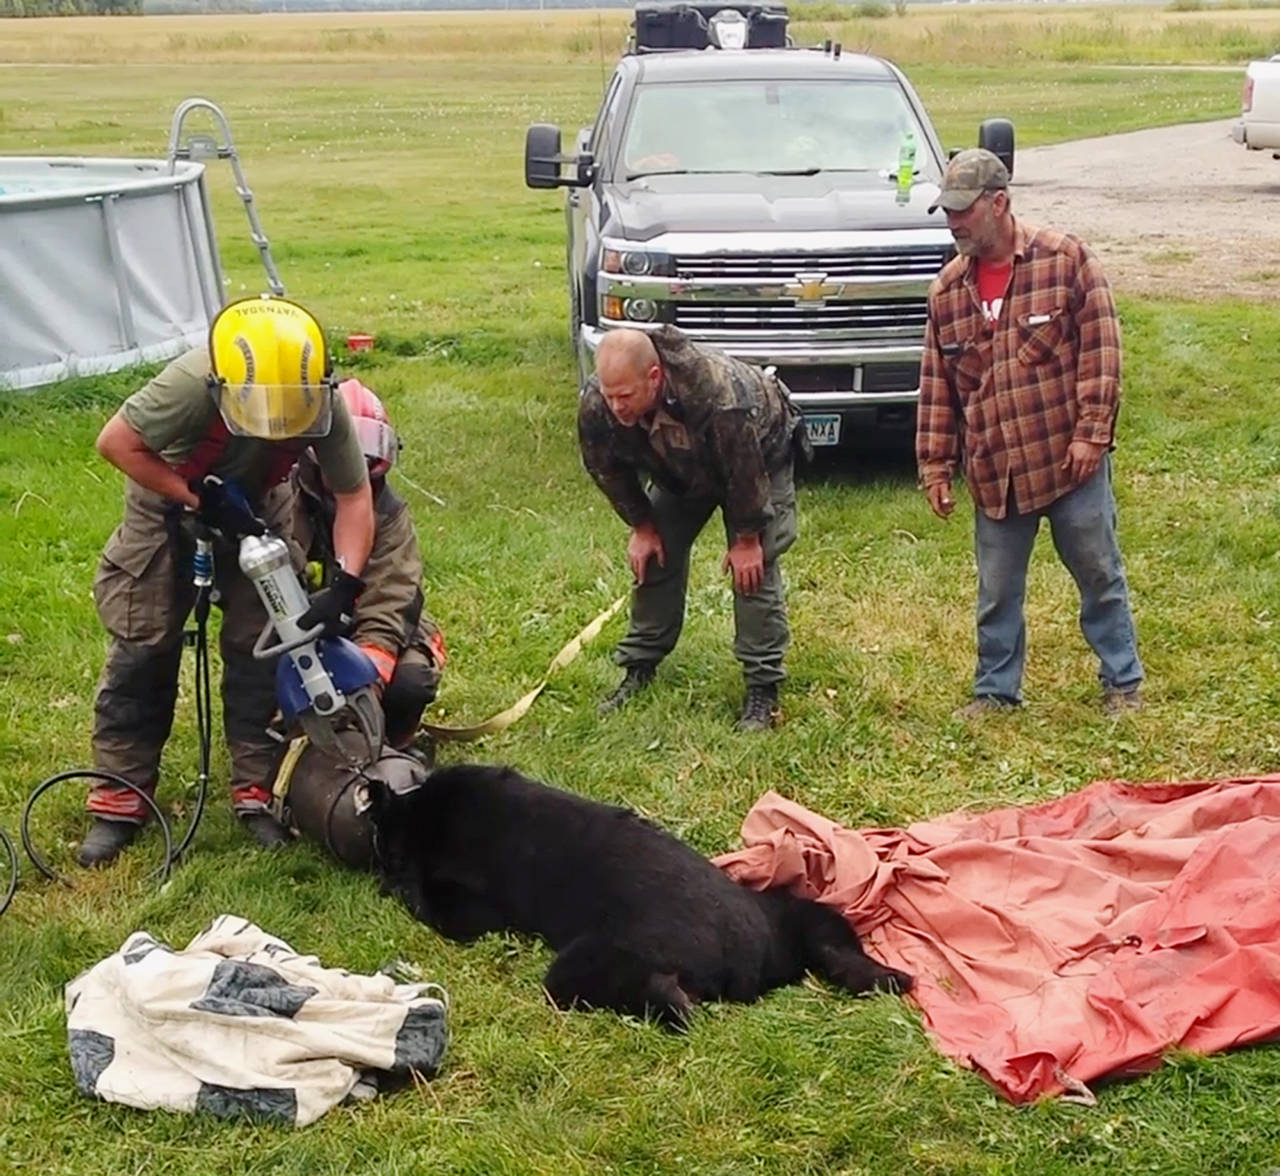 Rescue personnel use the Jaws of Life to free a black bear after its head became stuck inside a 10-gallon milk can near Roseau, Minnesota, on Sept. 7. (Dawn Knutson via AP)